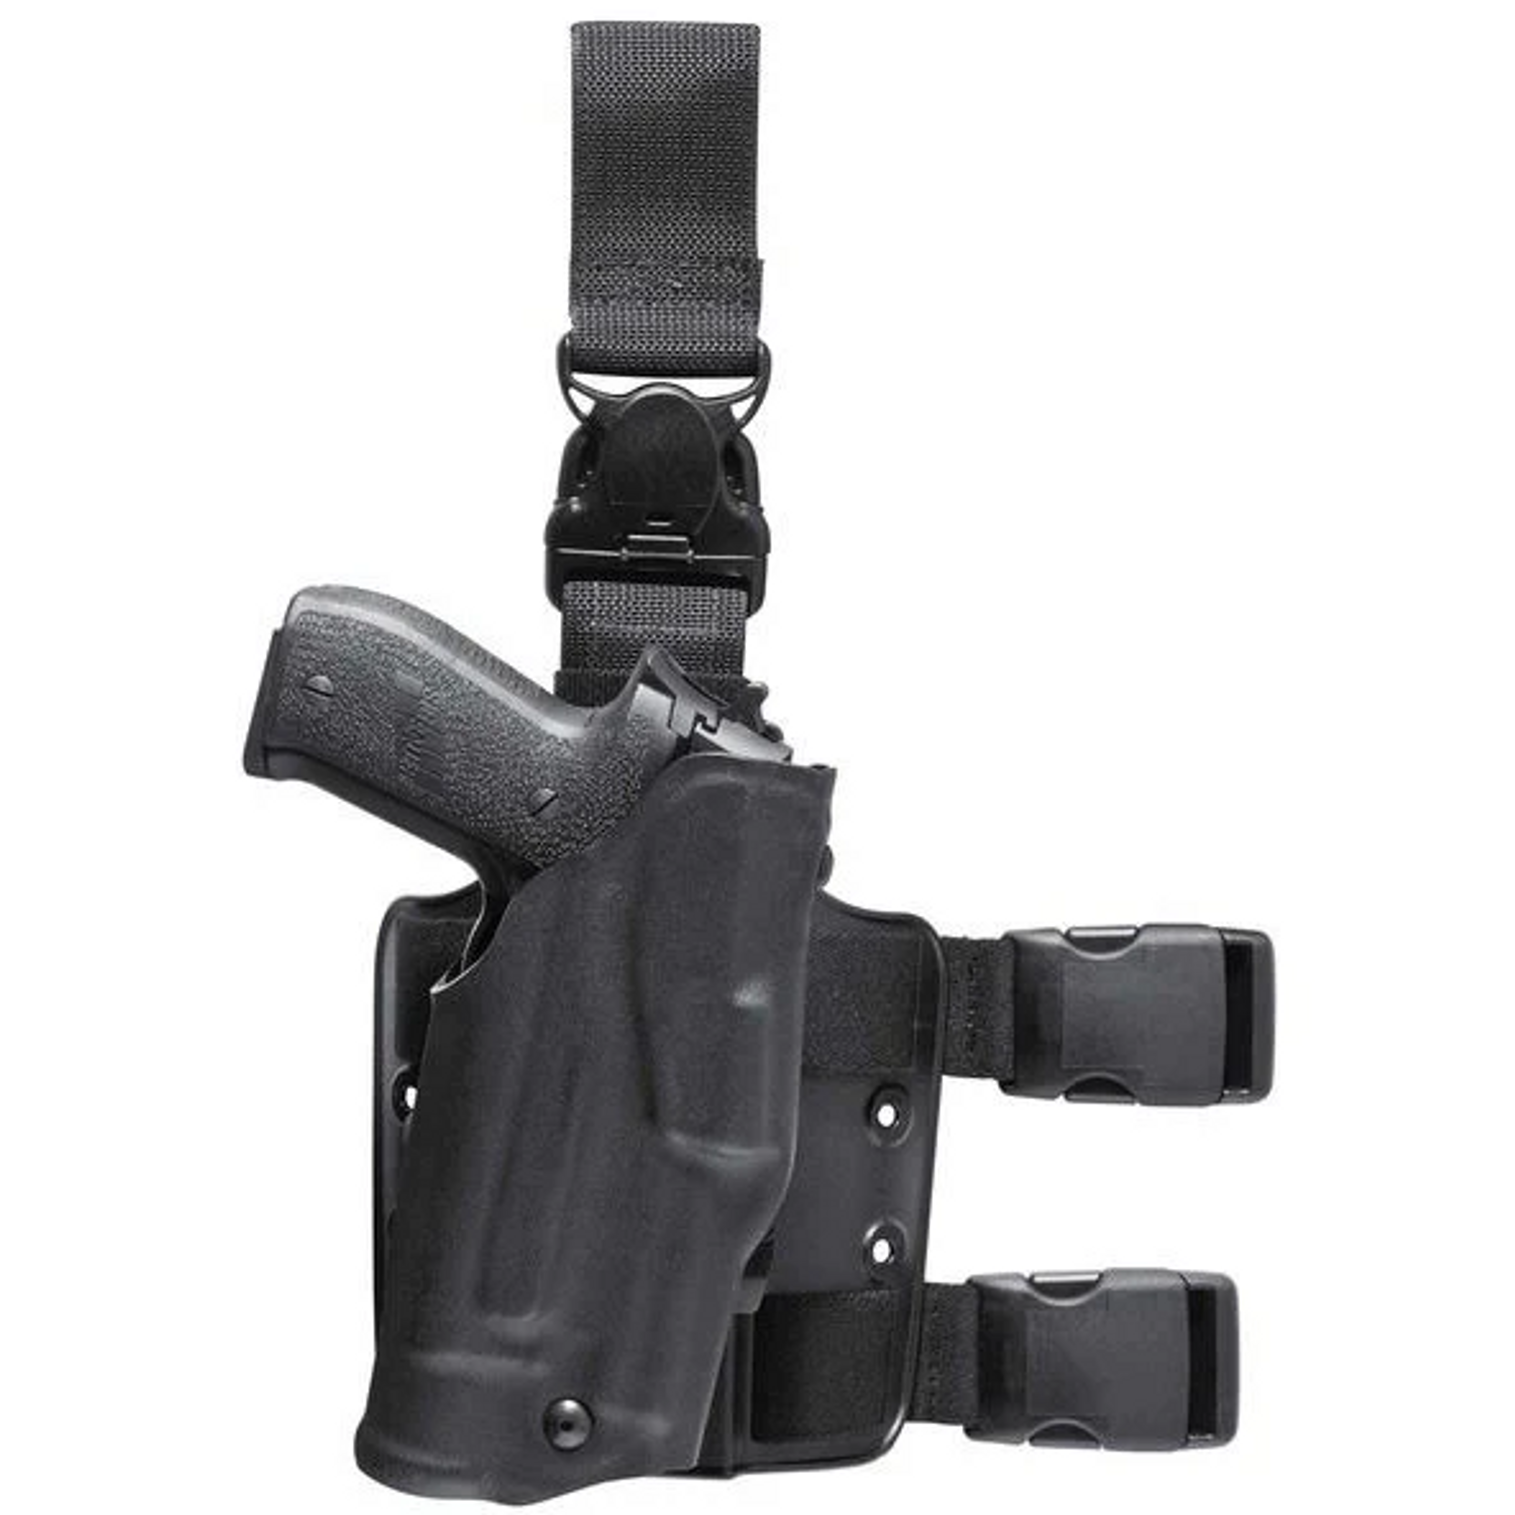 Model 6355 Als Tactical Holster With Quick-release Leg Harness For Beretta 92f